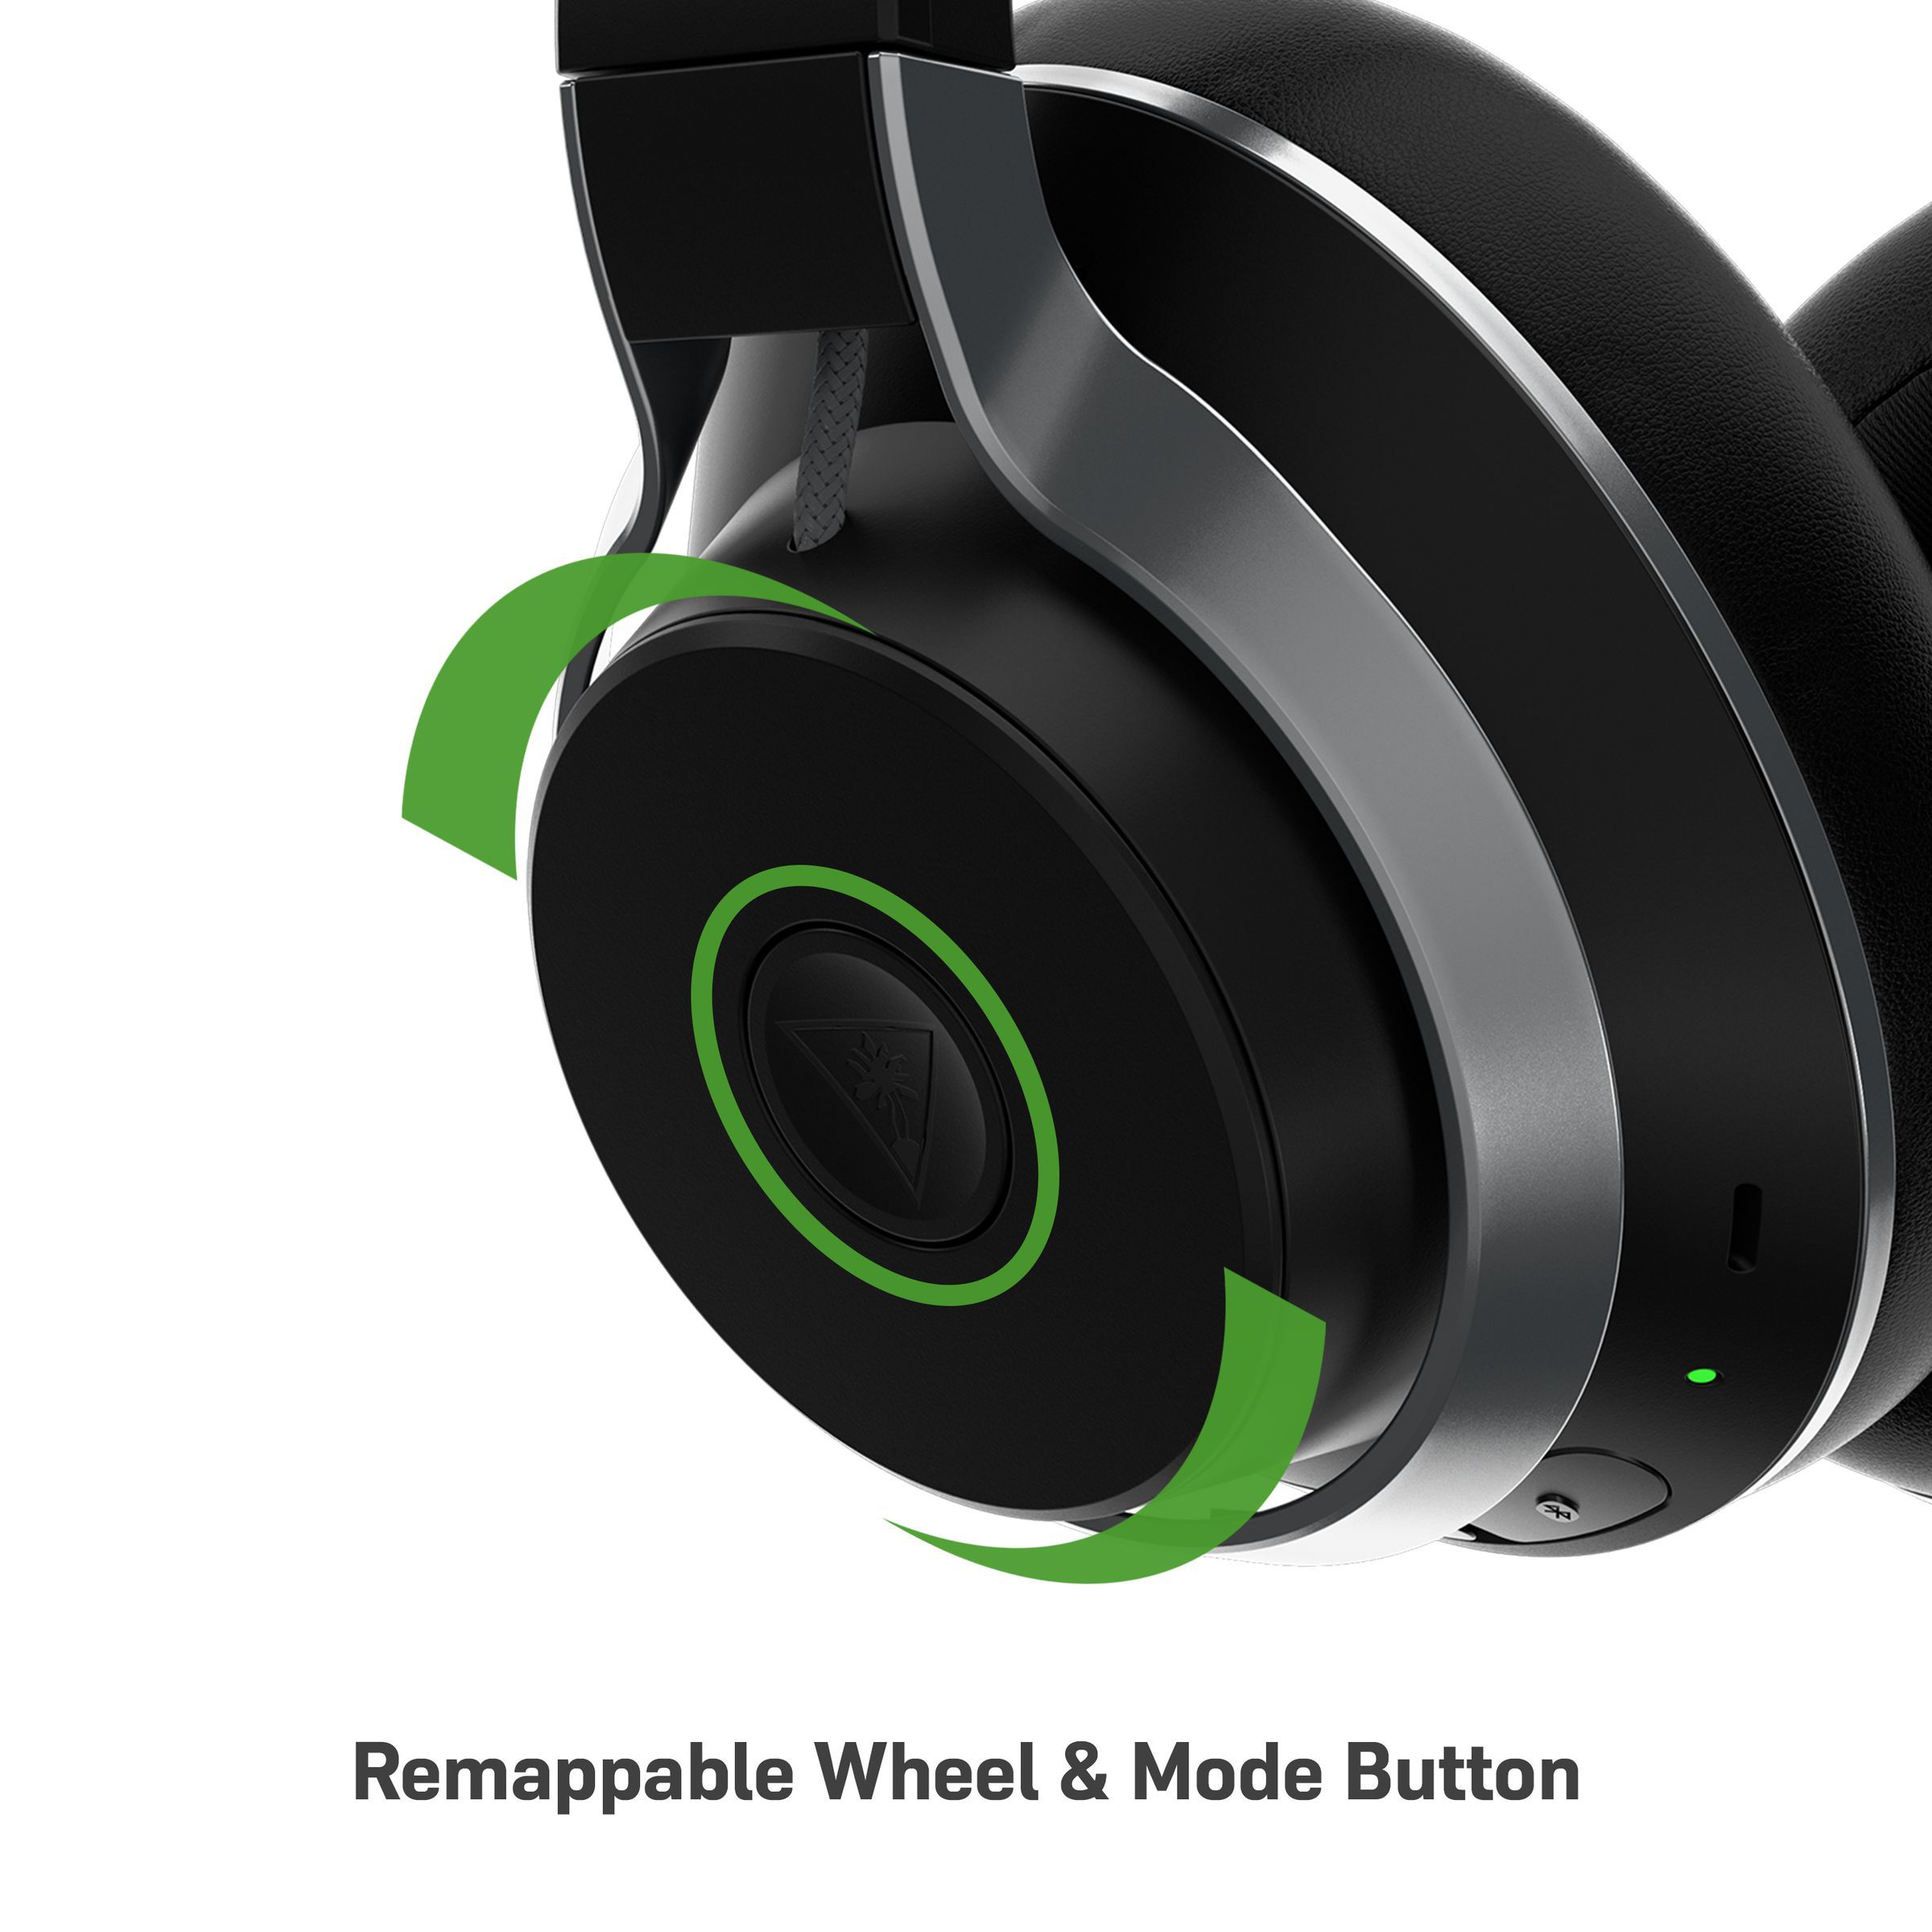 A close-up of the remappable wheel and mode button on the Turtle Beach Stealth Pro gaming headset.